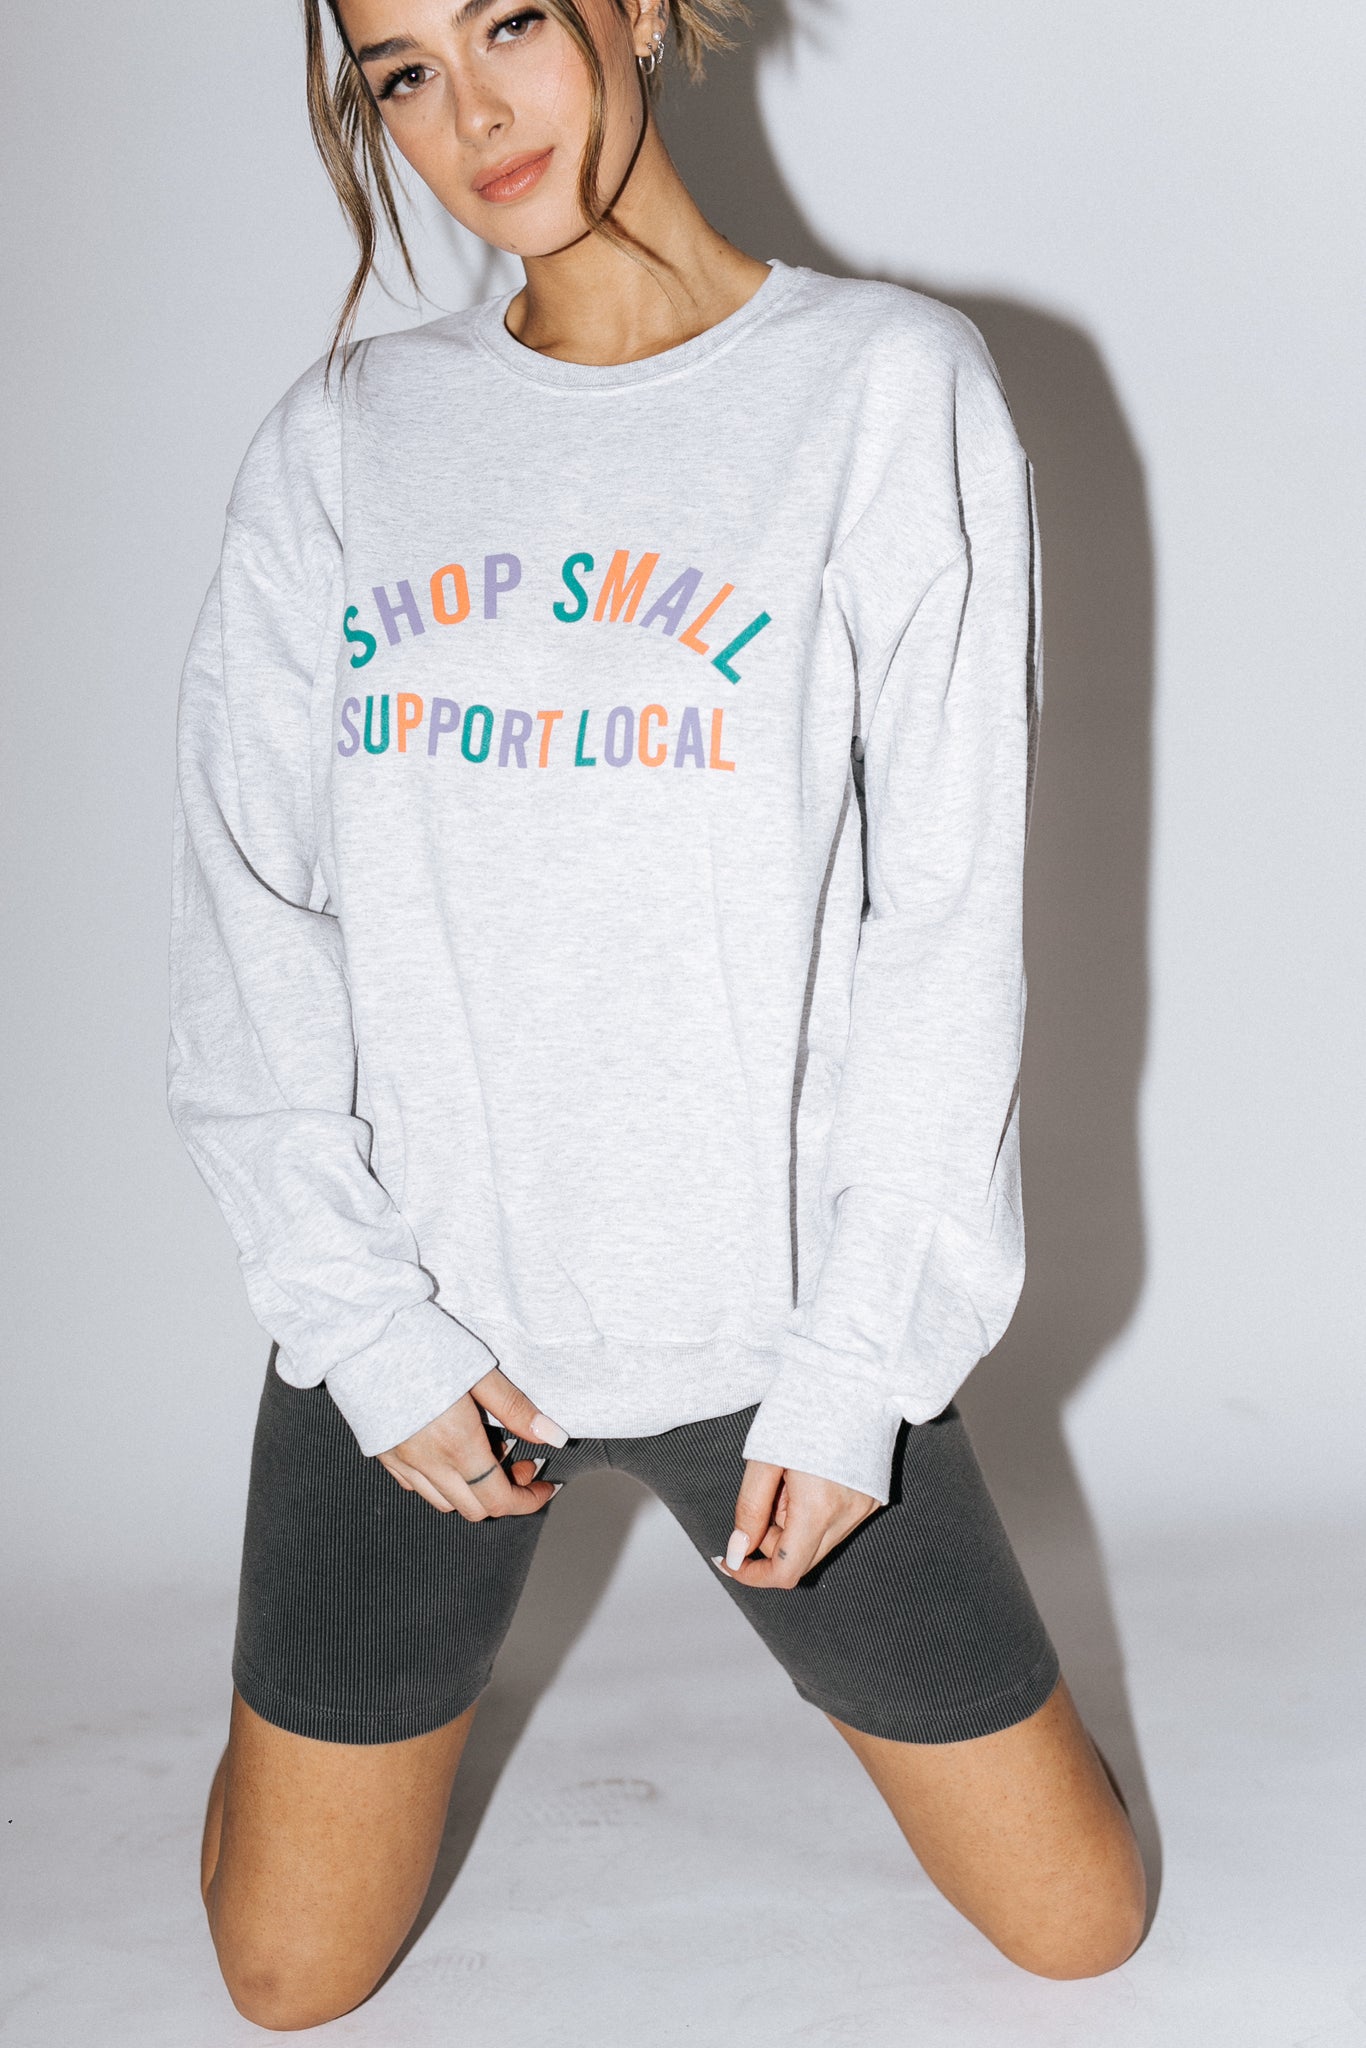 The Shop Local Sweater